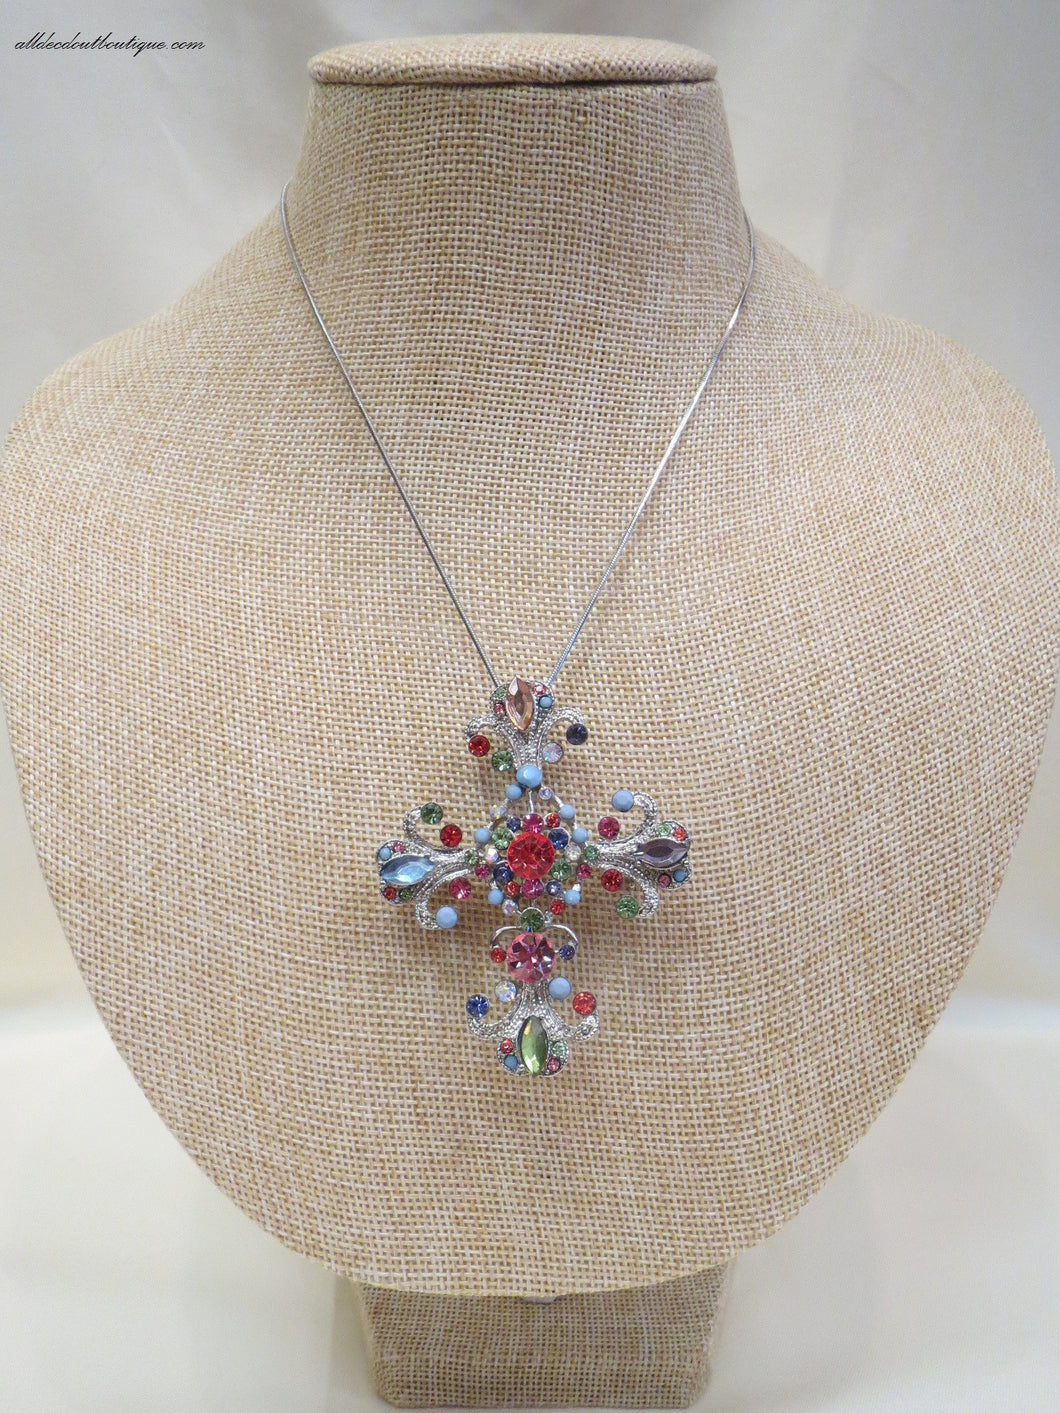 ADO | Necklace with Removable Cross Pendant - All Decd Out